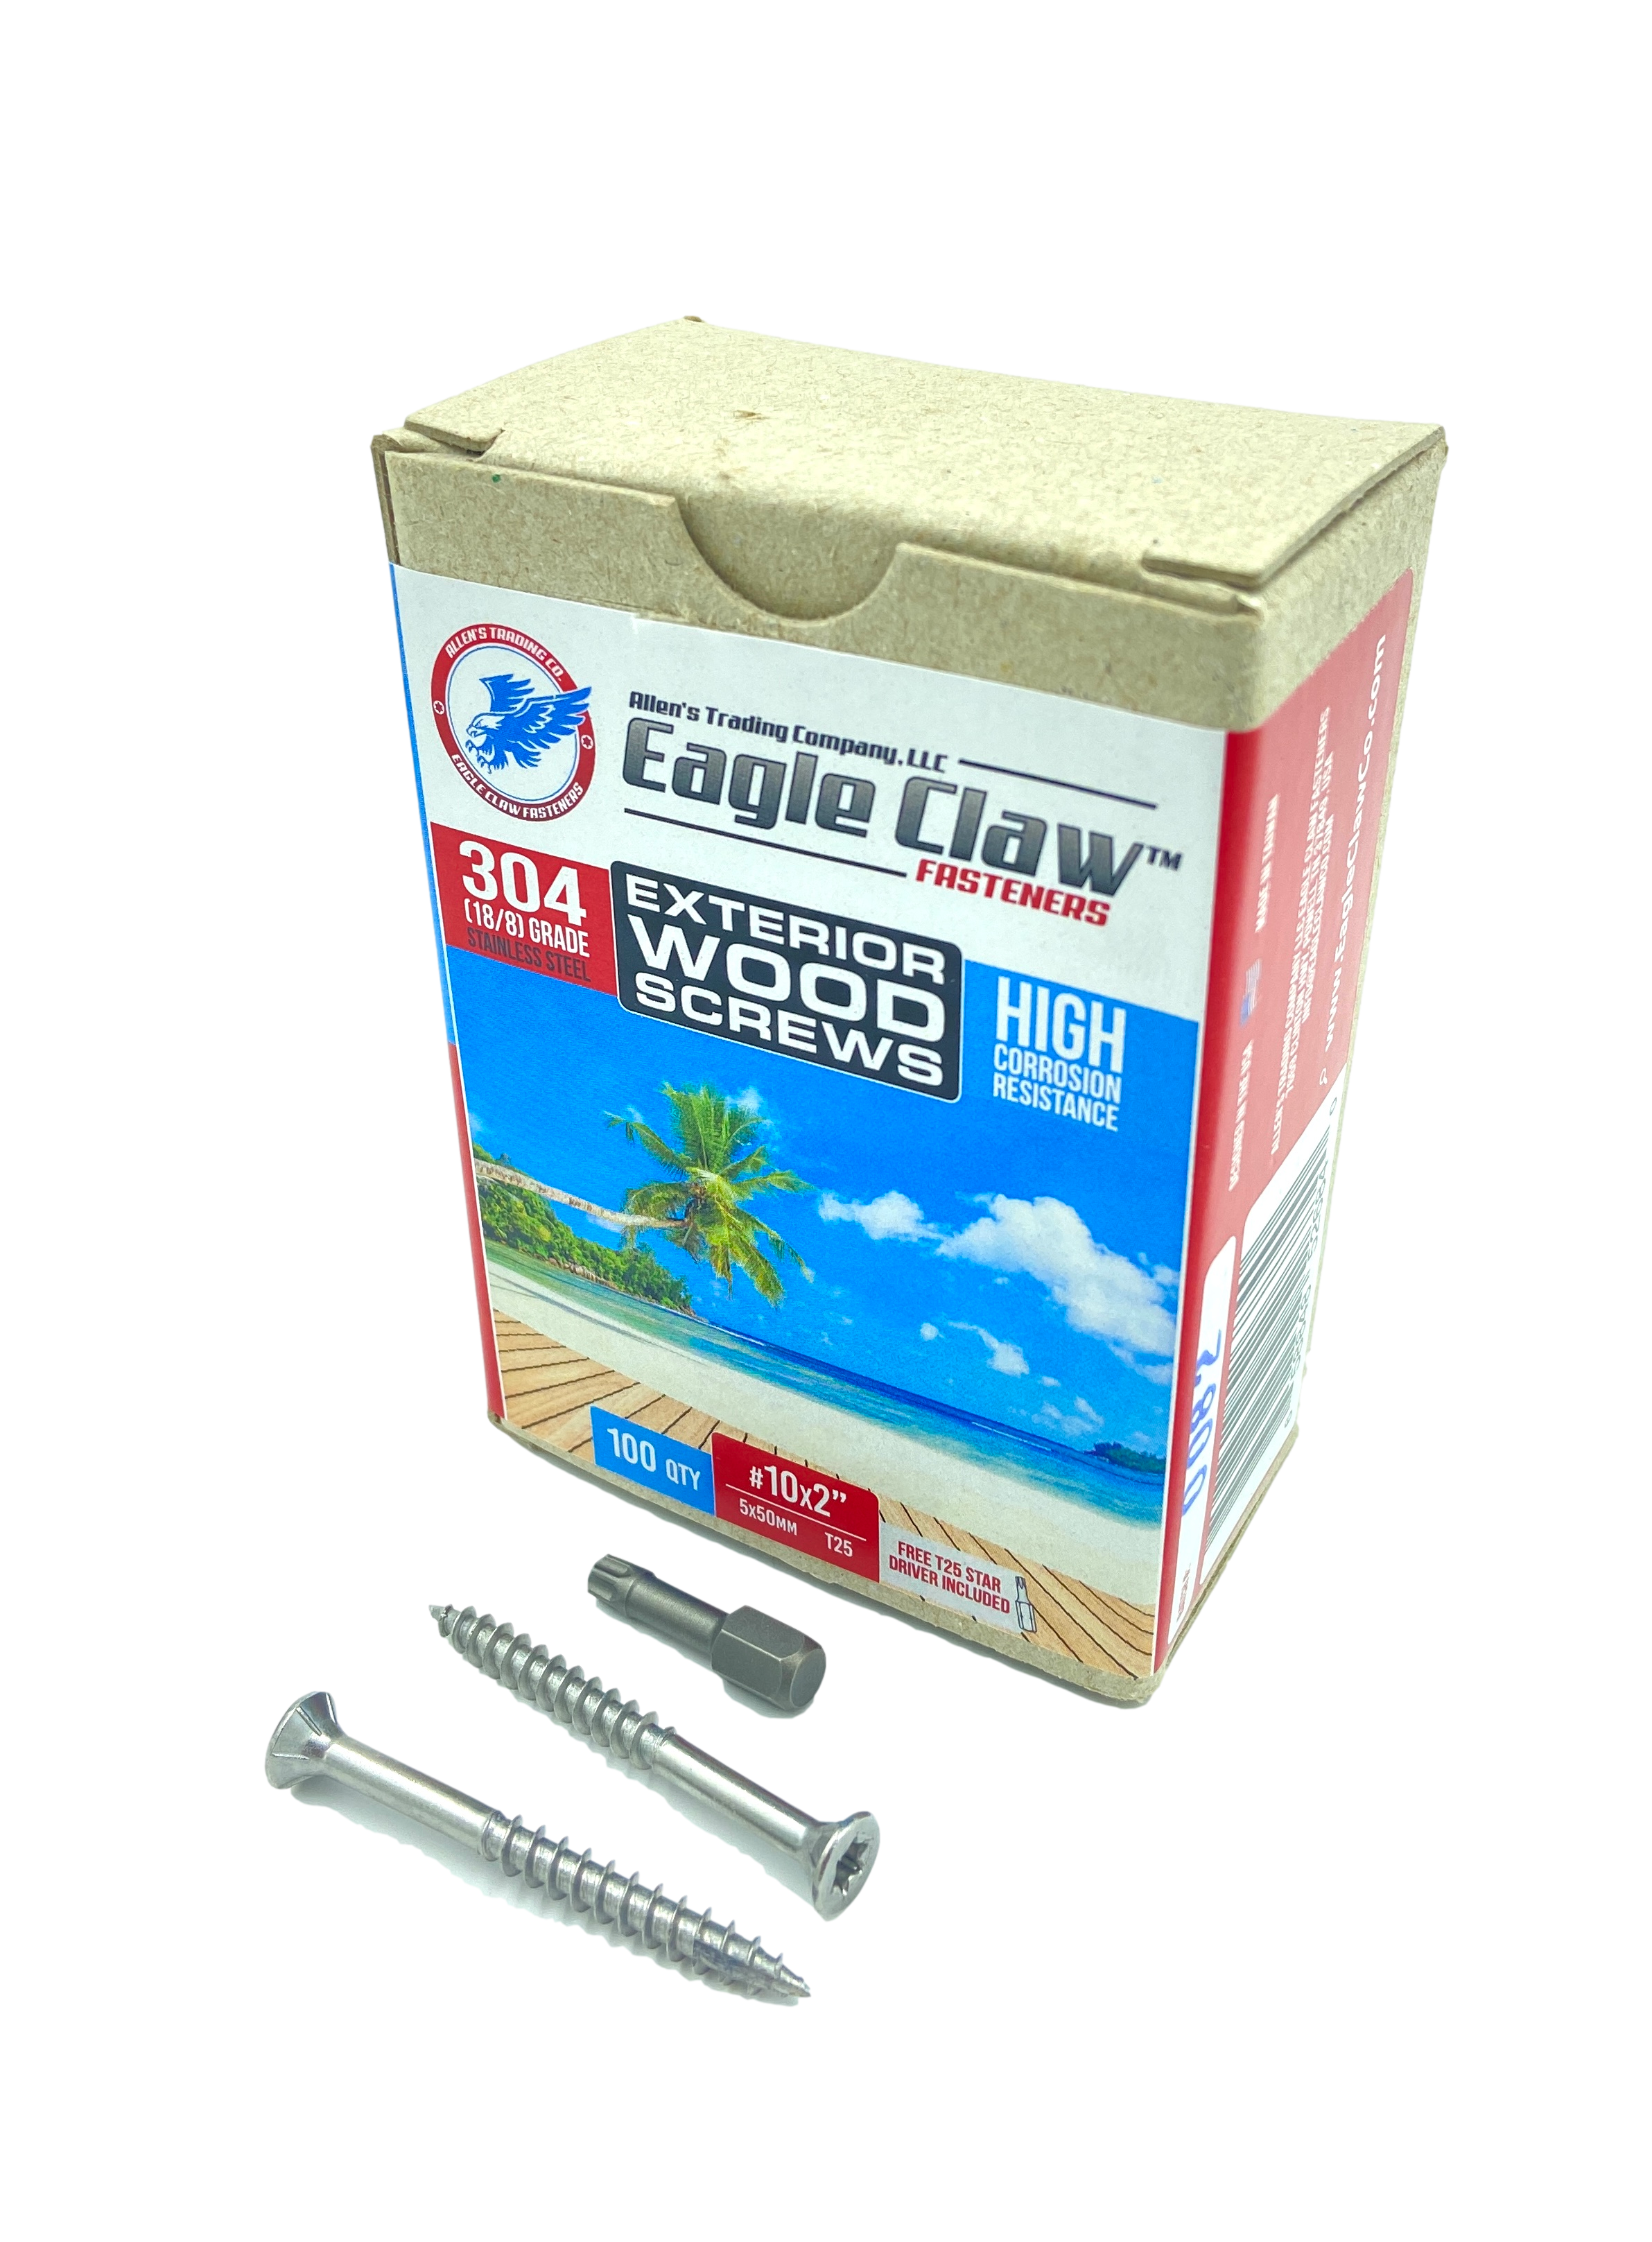 Eagle Claw Tools and Fasteners 10 x 2 1/2 Inch Stainless Steel Deck Screws 100 Box T25 Star Drive Included 